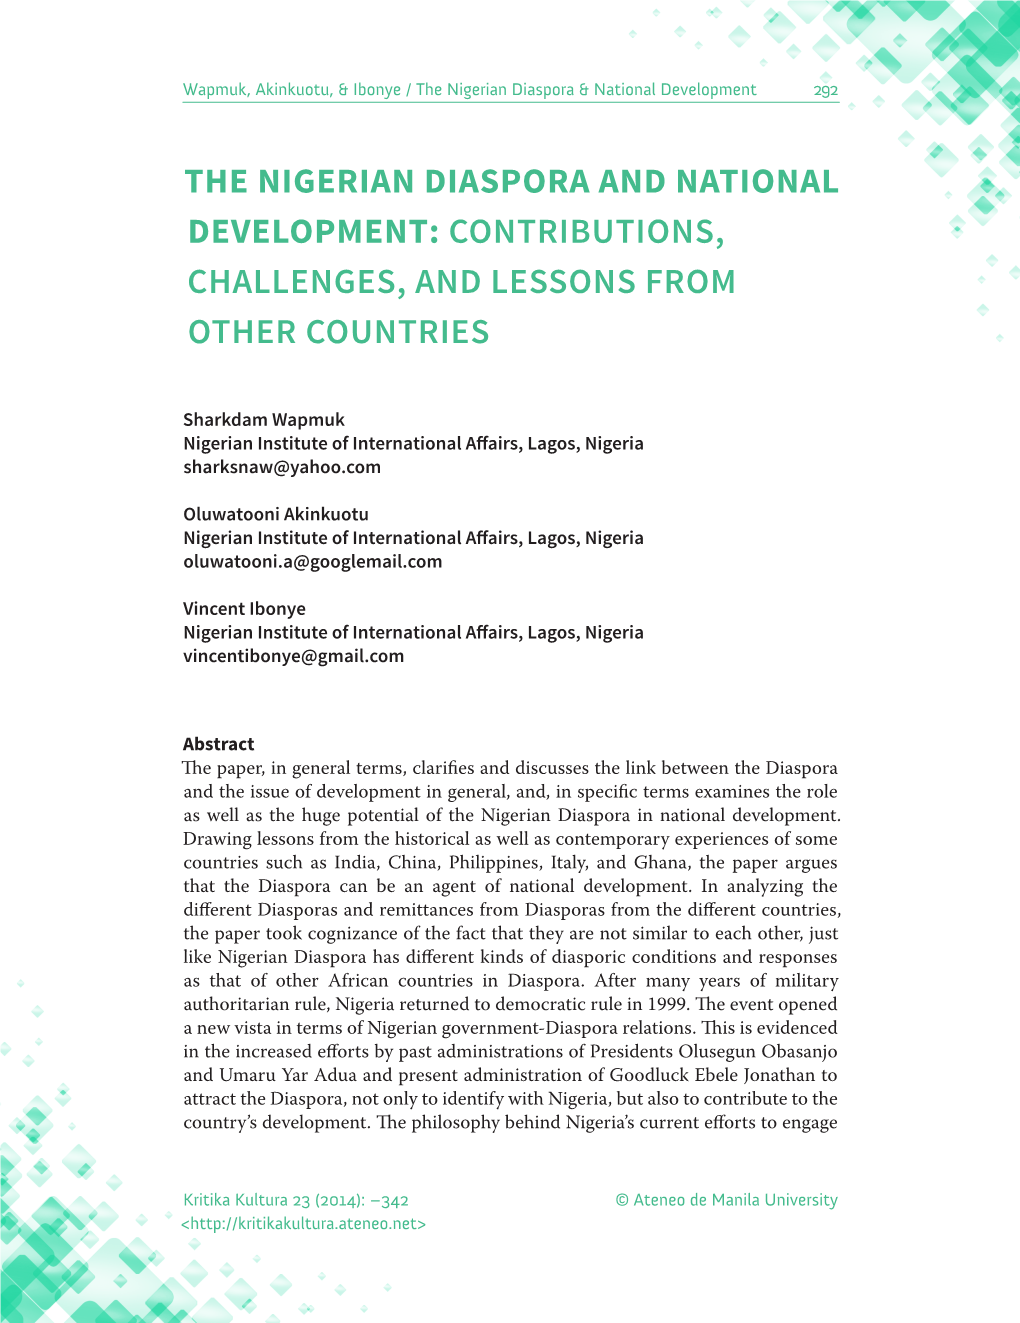 The Nigerian Diaspora and National Development: Contributions, Challenges, and Lessons from Other Countries